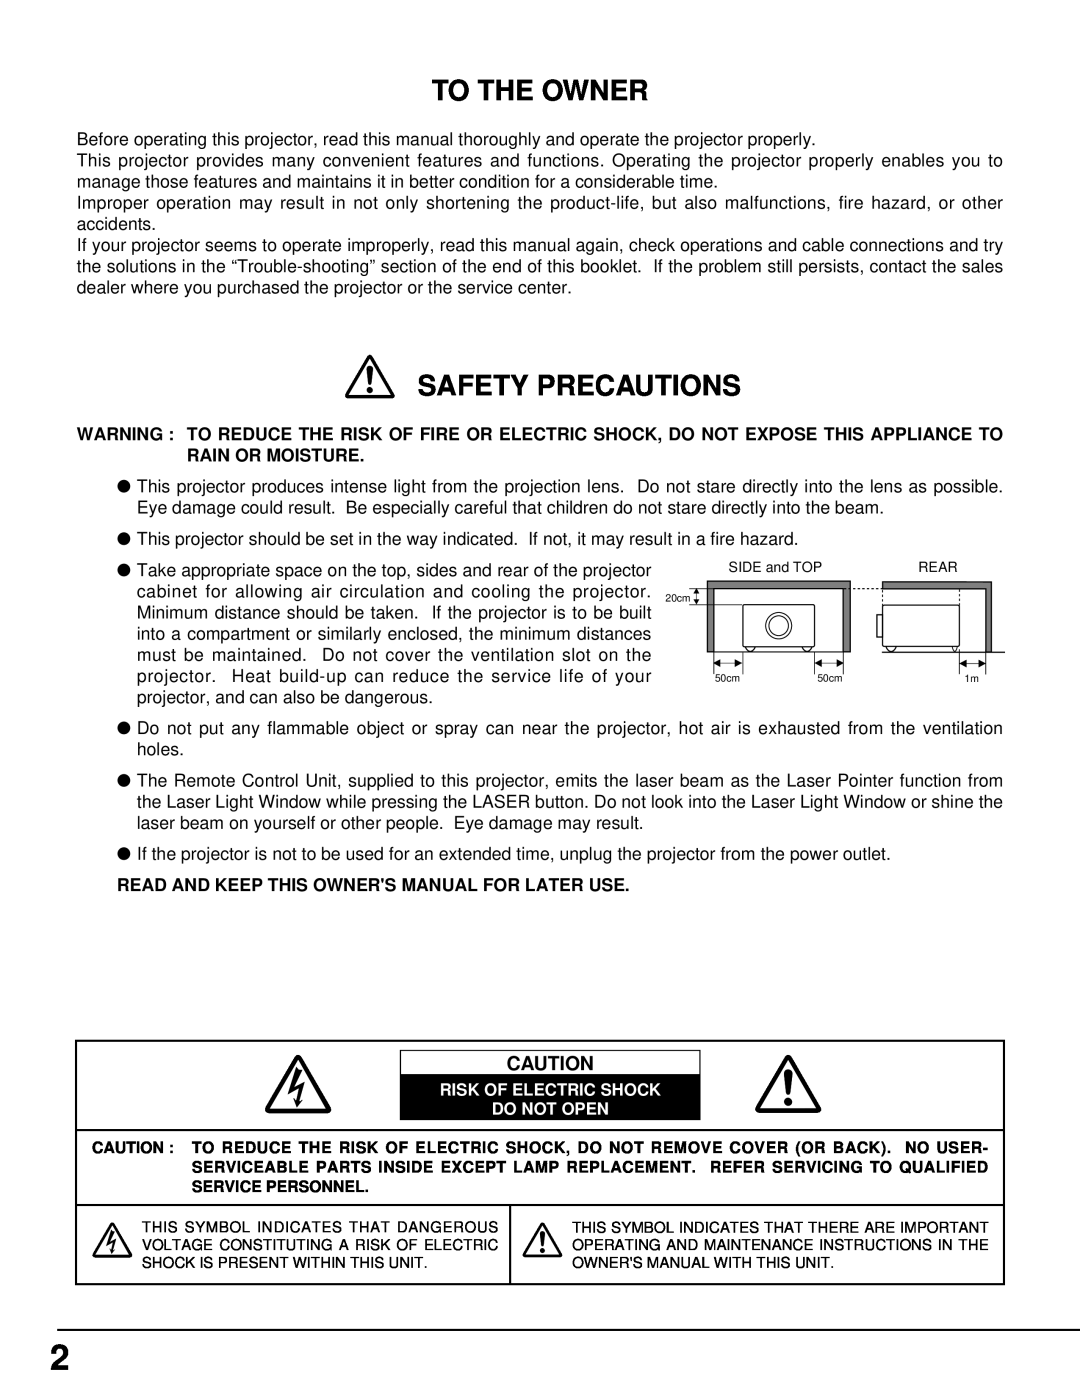 Eiki LC-X3/X3L instruction manual To The Owner, Safety Precautions, Read And Keep This Owners Manual For Later Use 